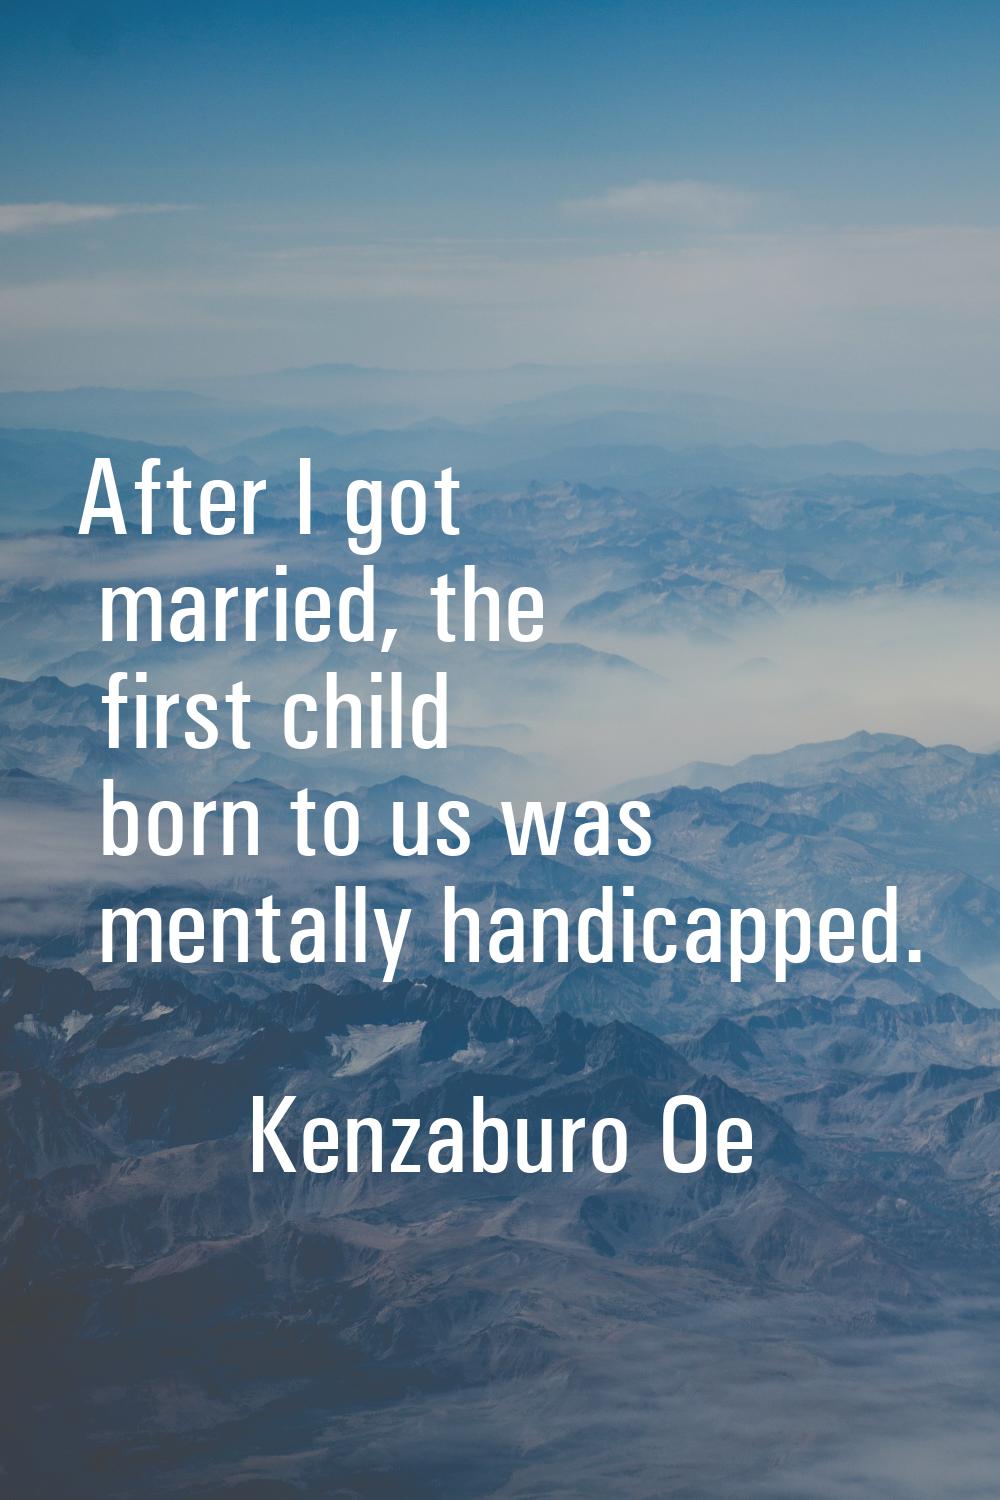 After I got married, the first child born to us was mentally handicapped.